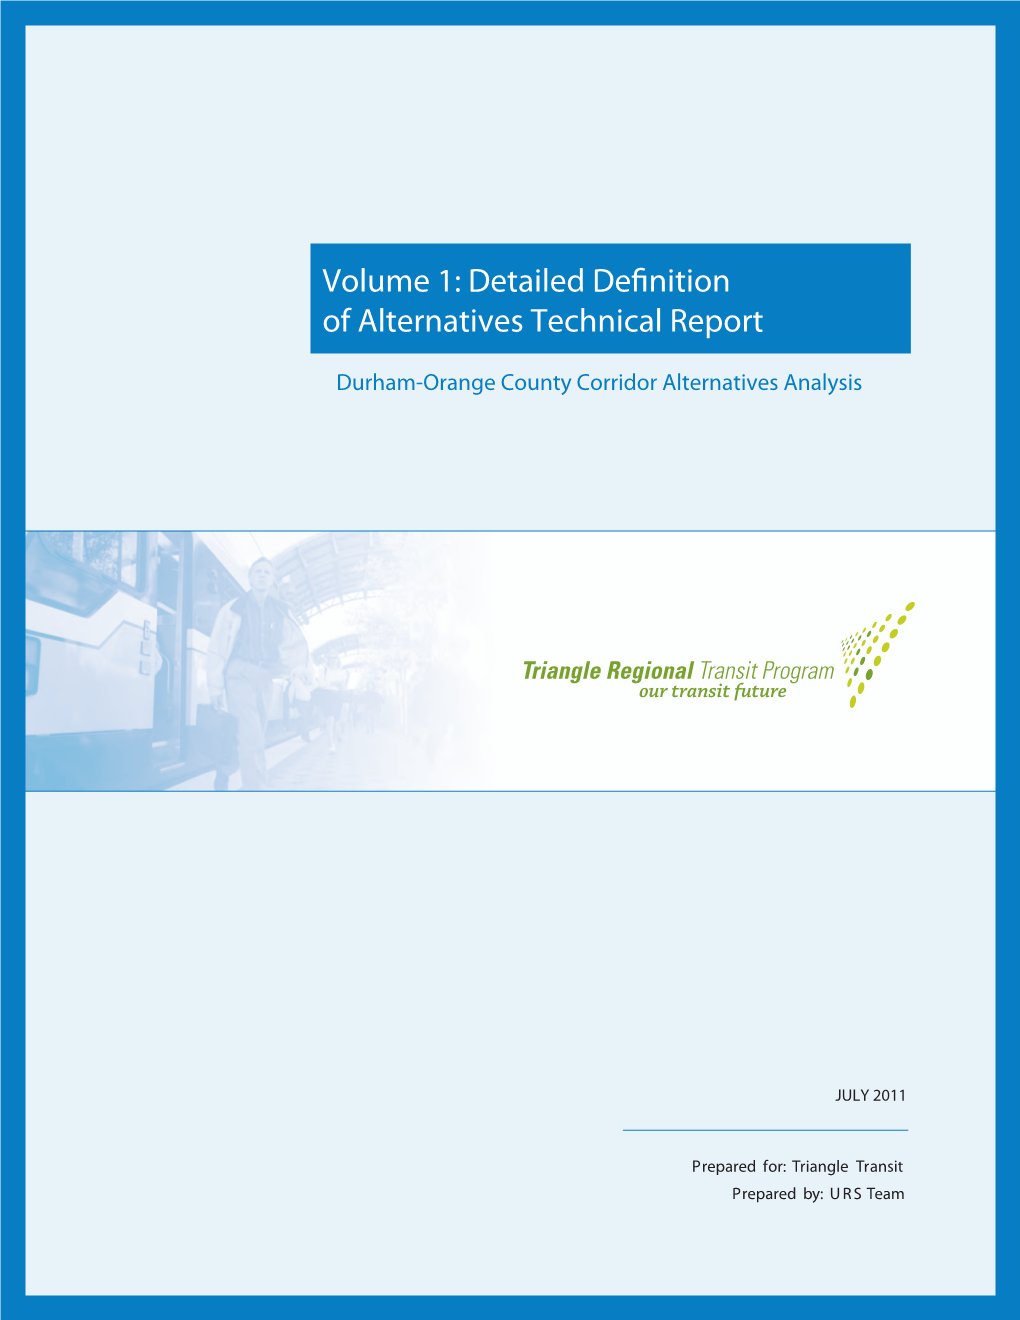 Volume 1: Detailed Definition of Alternatives Technical Report